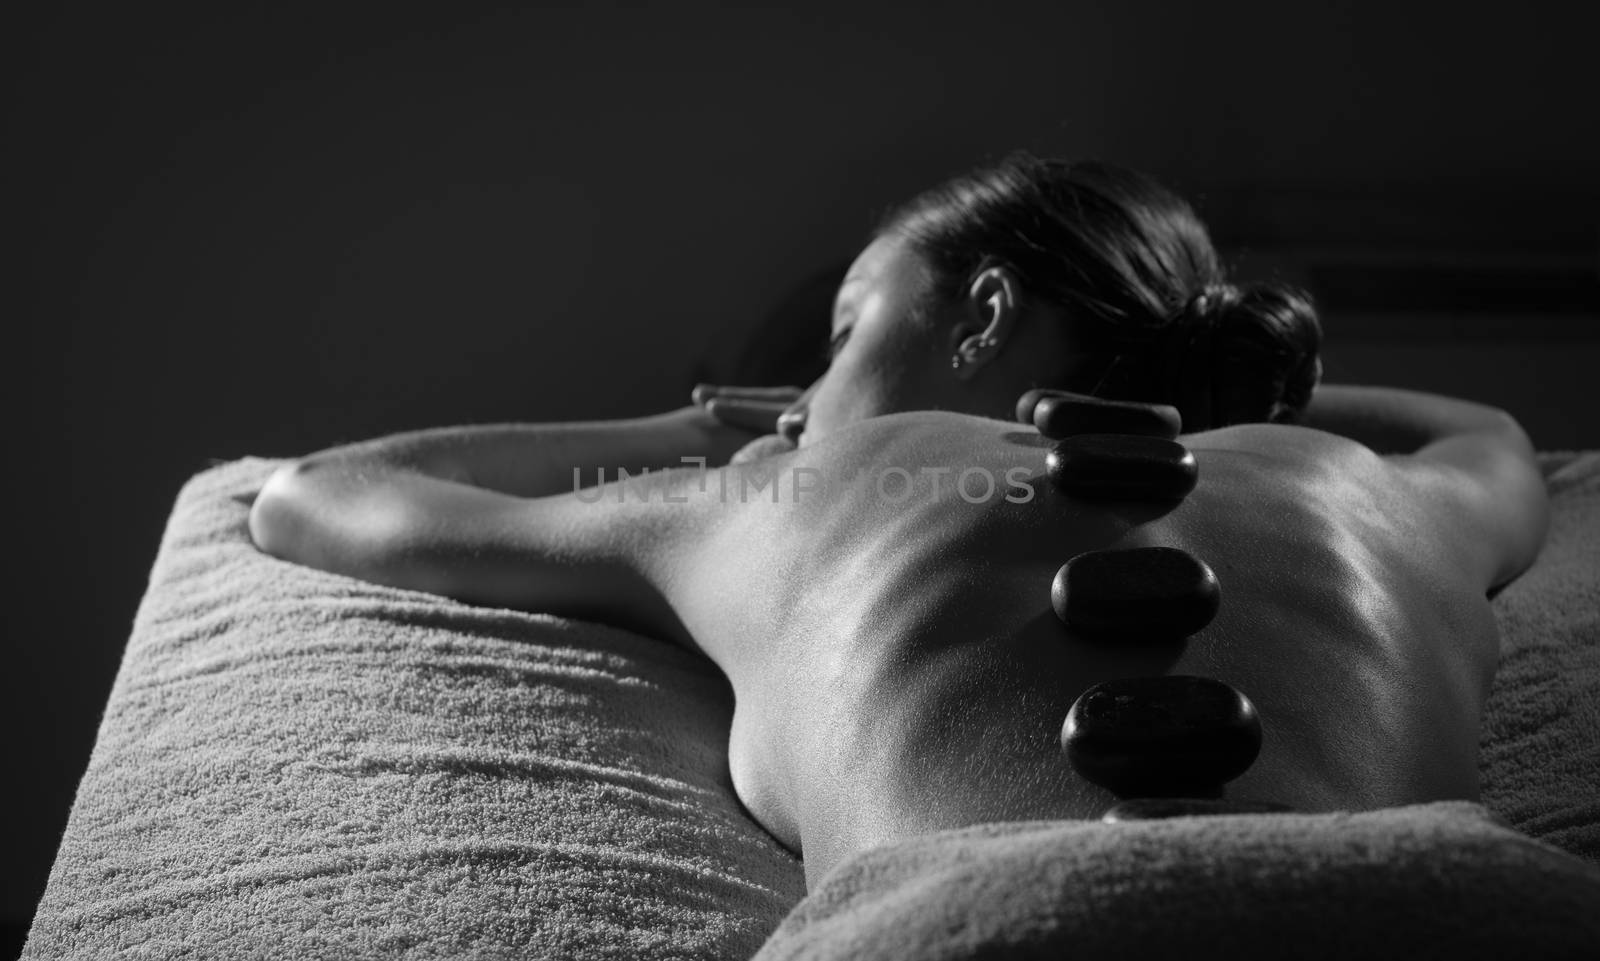 Hot stone massage at spa by stokkete